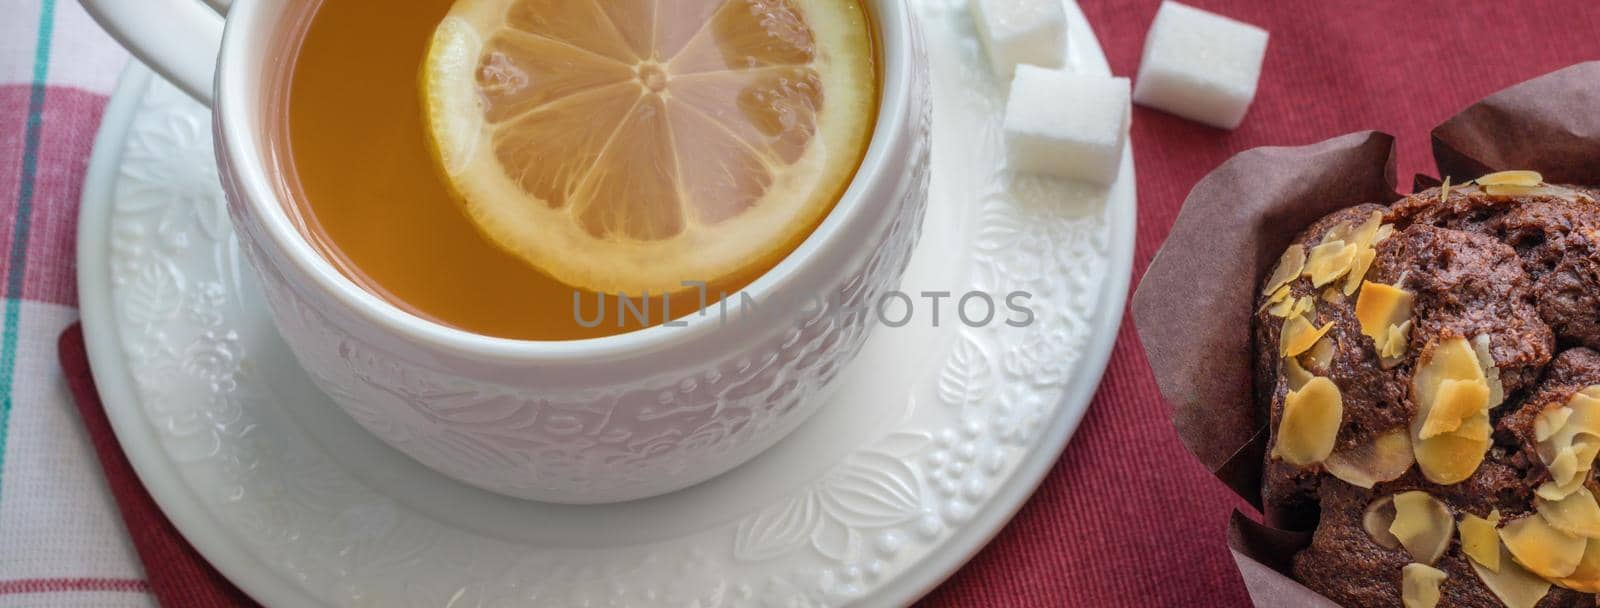 Tea with lemon in a white cup on a saucer with cubes of raffinated sugar and chocolate muffin with pistachios on a red napkin. High angle view, panoramic size